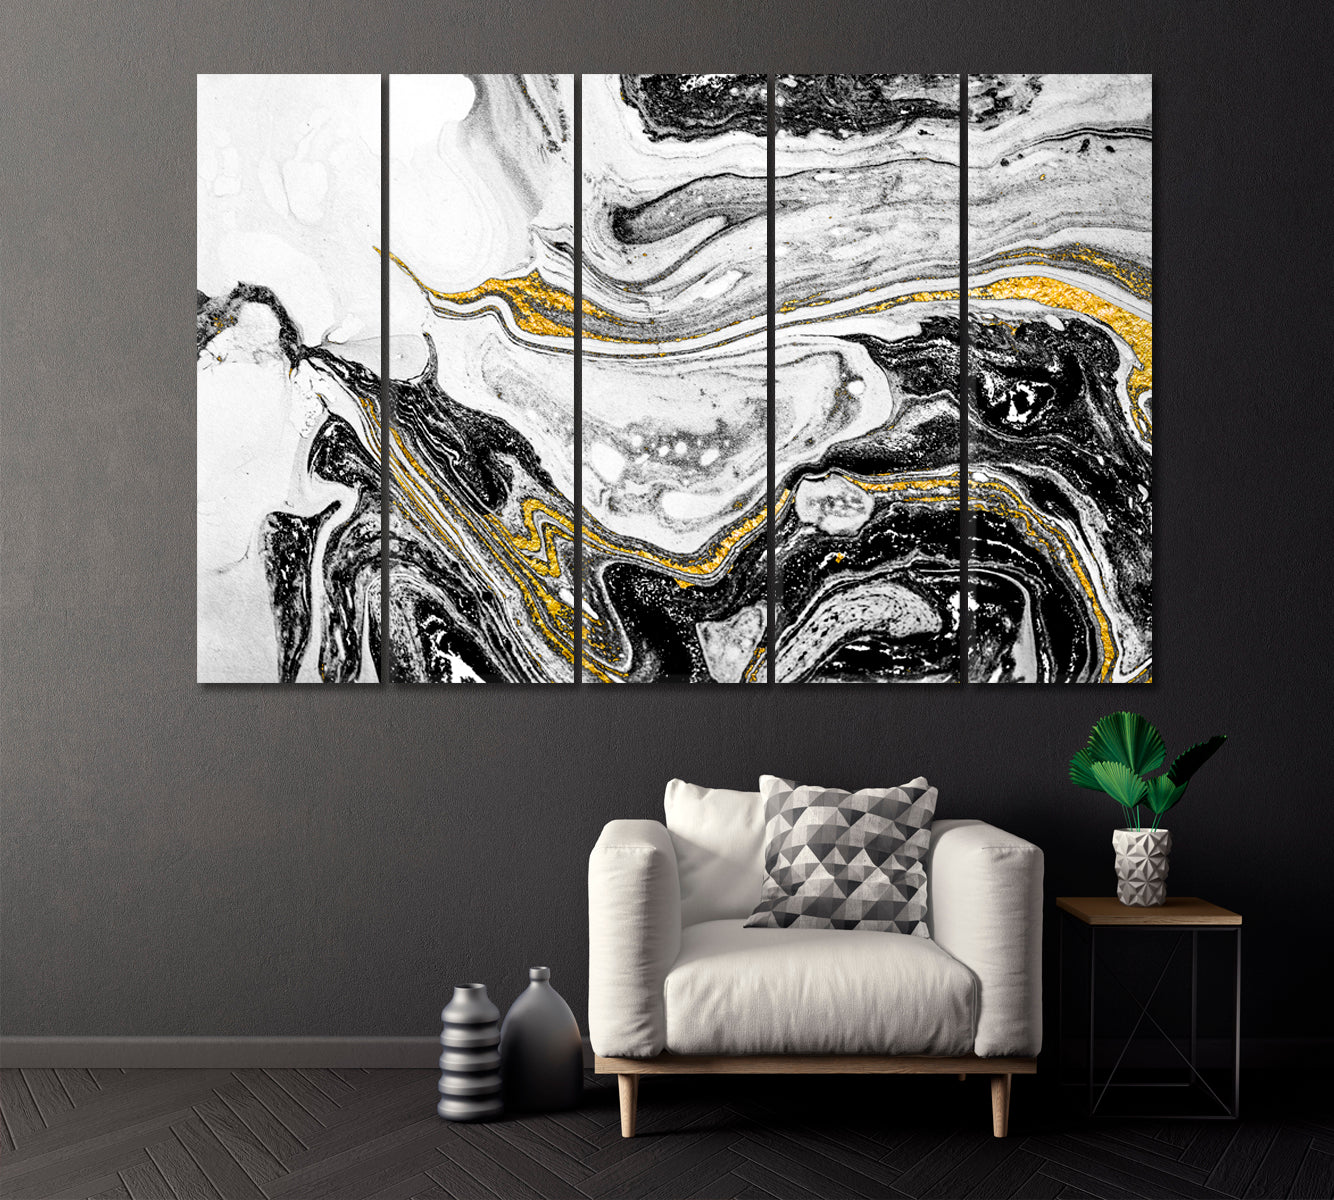 Luxury Black and White Paper Marbling Canvas Print ArtLexy 5 Panels 36"x24" inches 